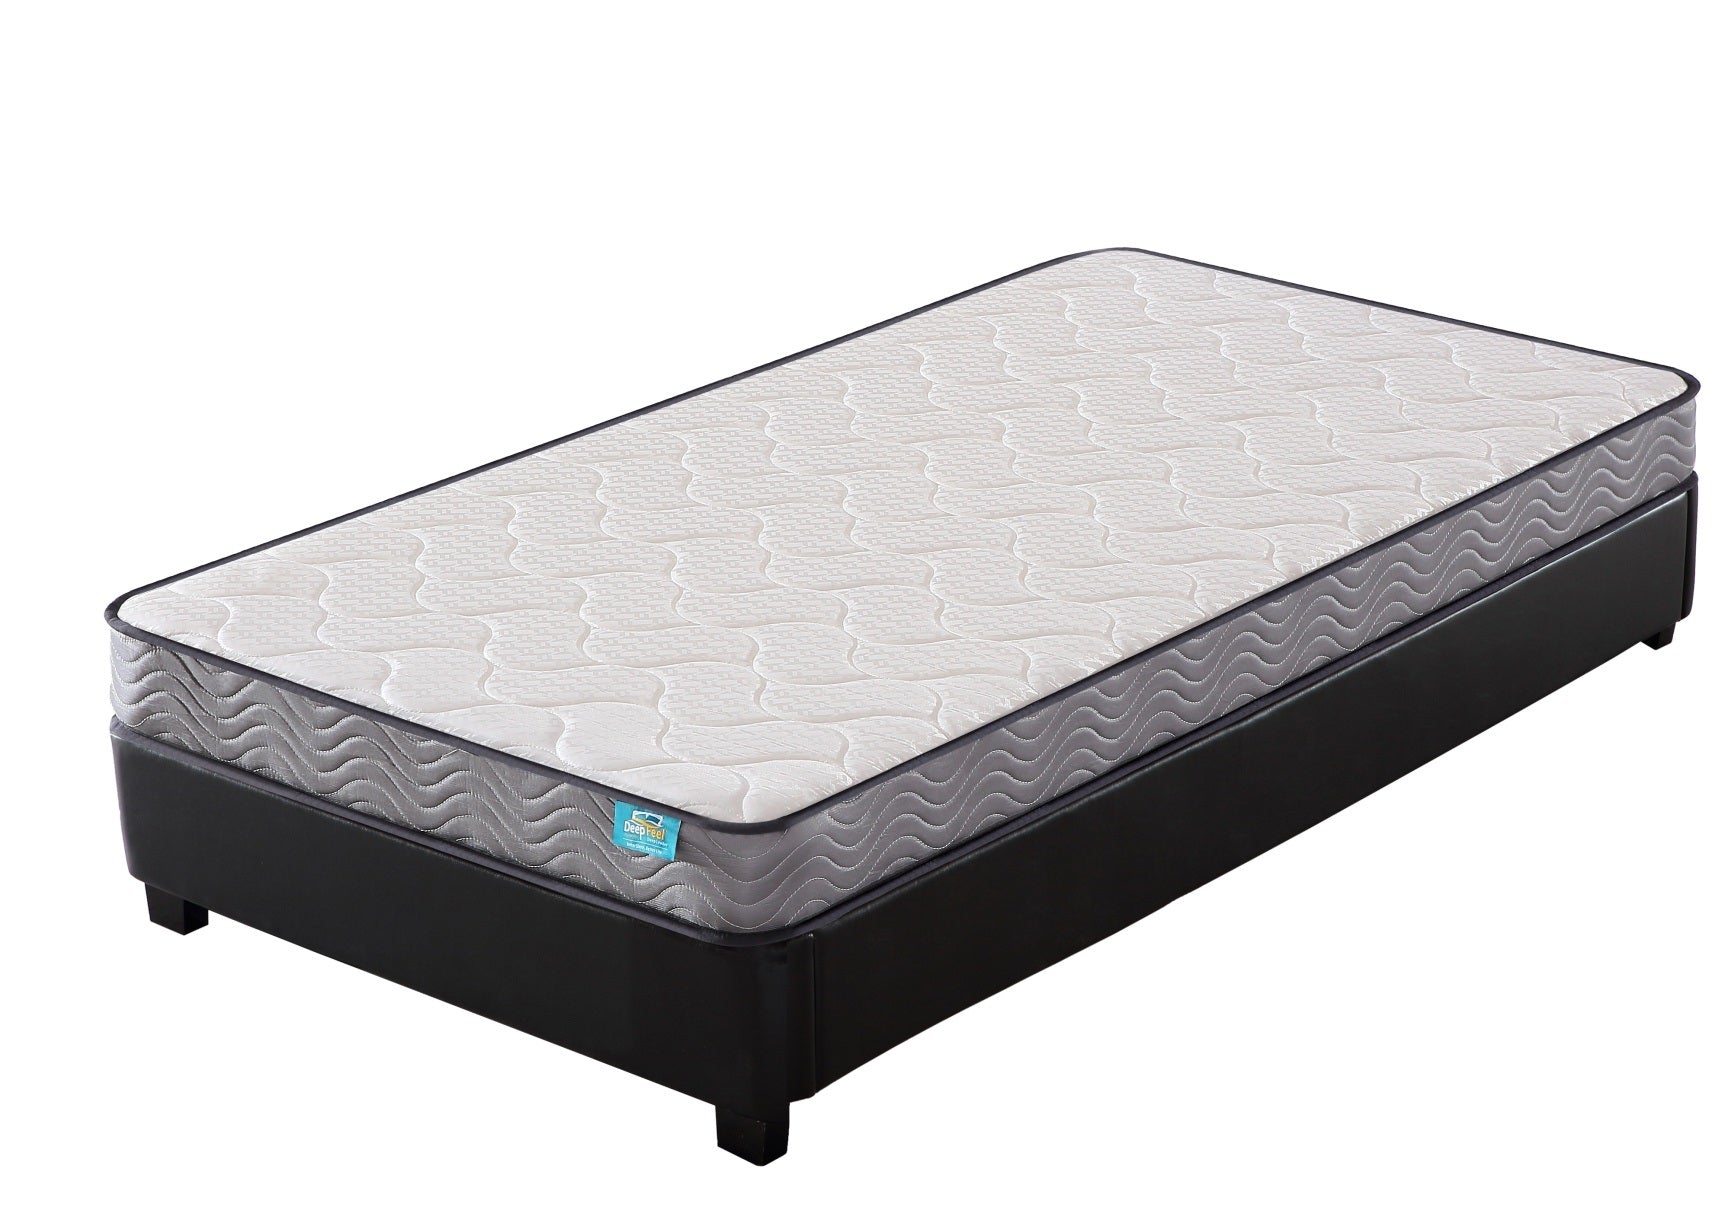 ViscoLogic SAVY Deep Feel Reversible High Density Foam Mattress for Guest Beds, Bunk Beds and Trundles (Twin)